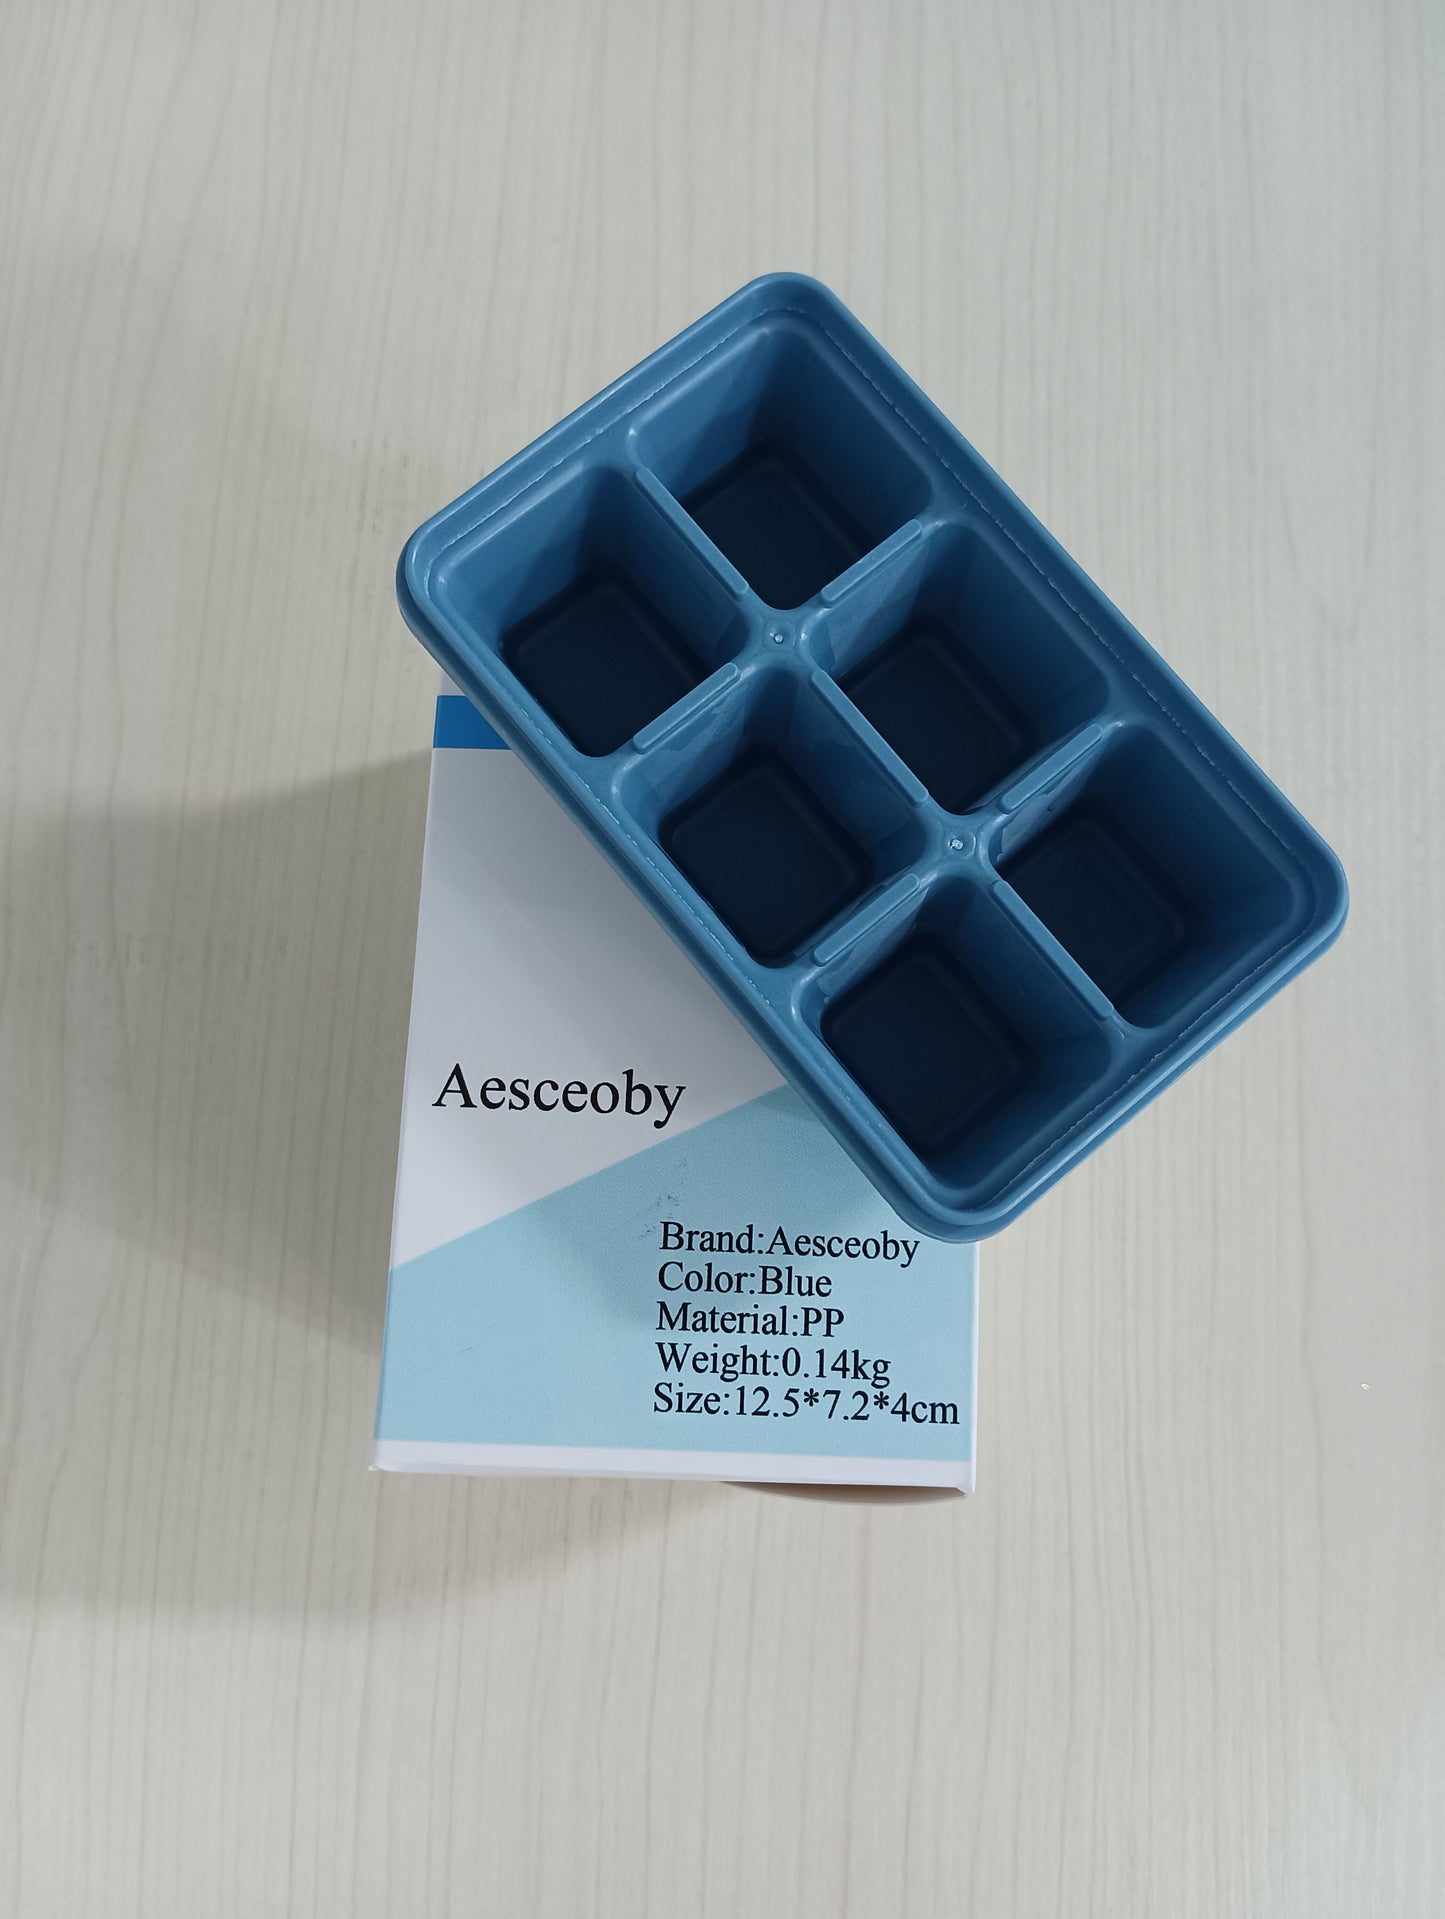 Aesceoby Ice cube grinder homemade small ice compartment food grade silicone home press refrigerator ice making magic tool making ice cube mold